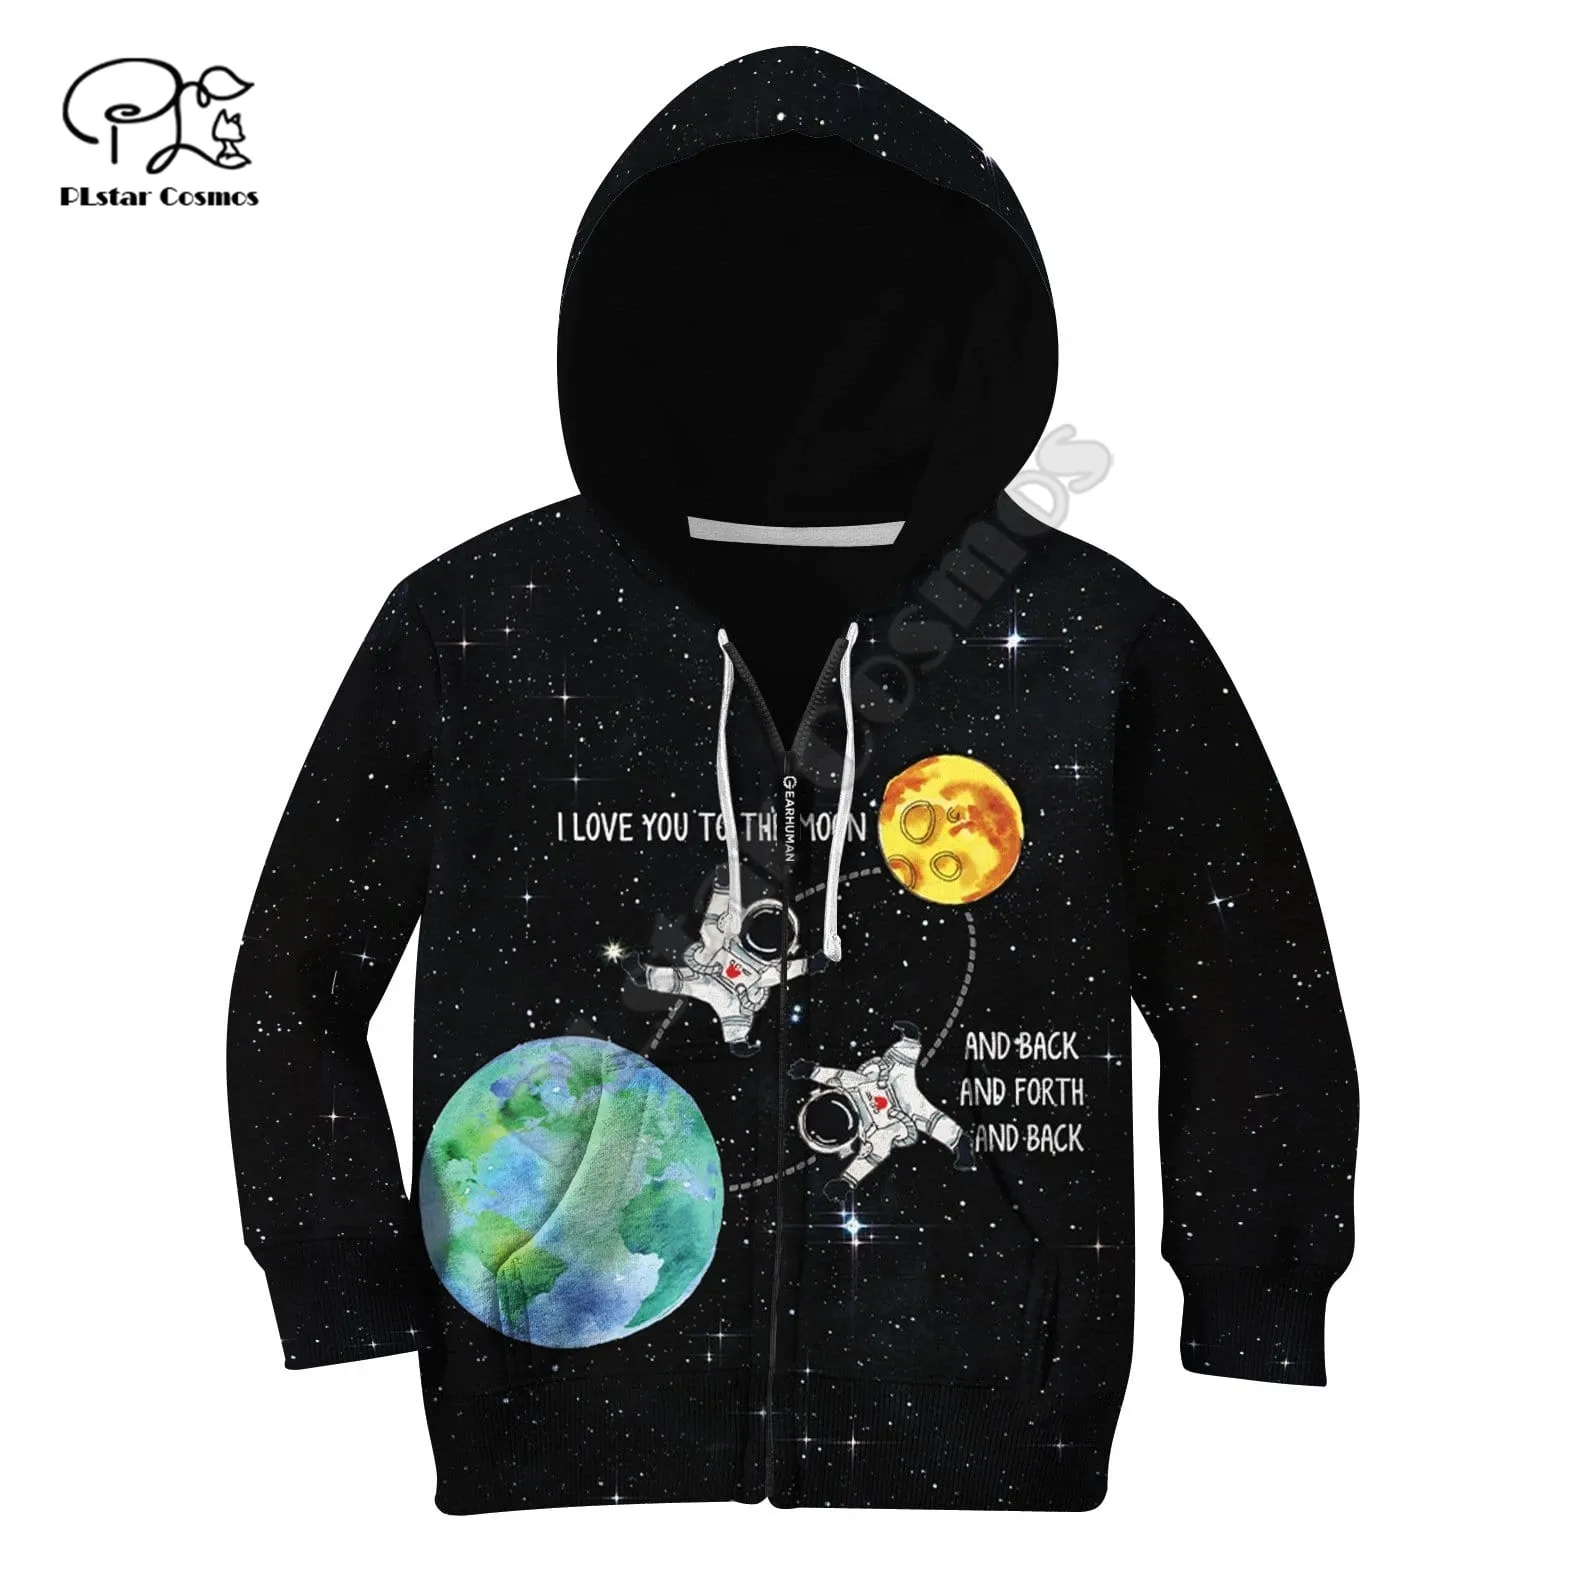 

I love you to the moon and back and forth and back Children zipper coat Long Sleeve Pullover Cartoon Sweatshirt Tracksuit Hooded